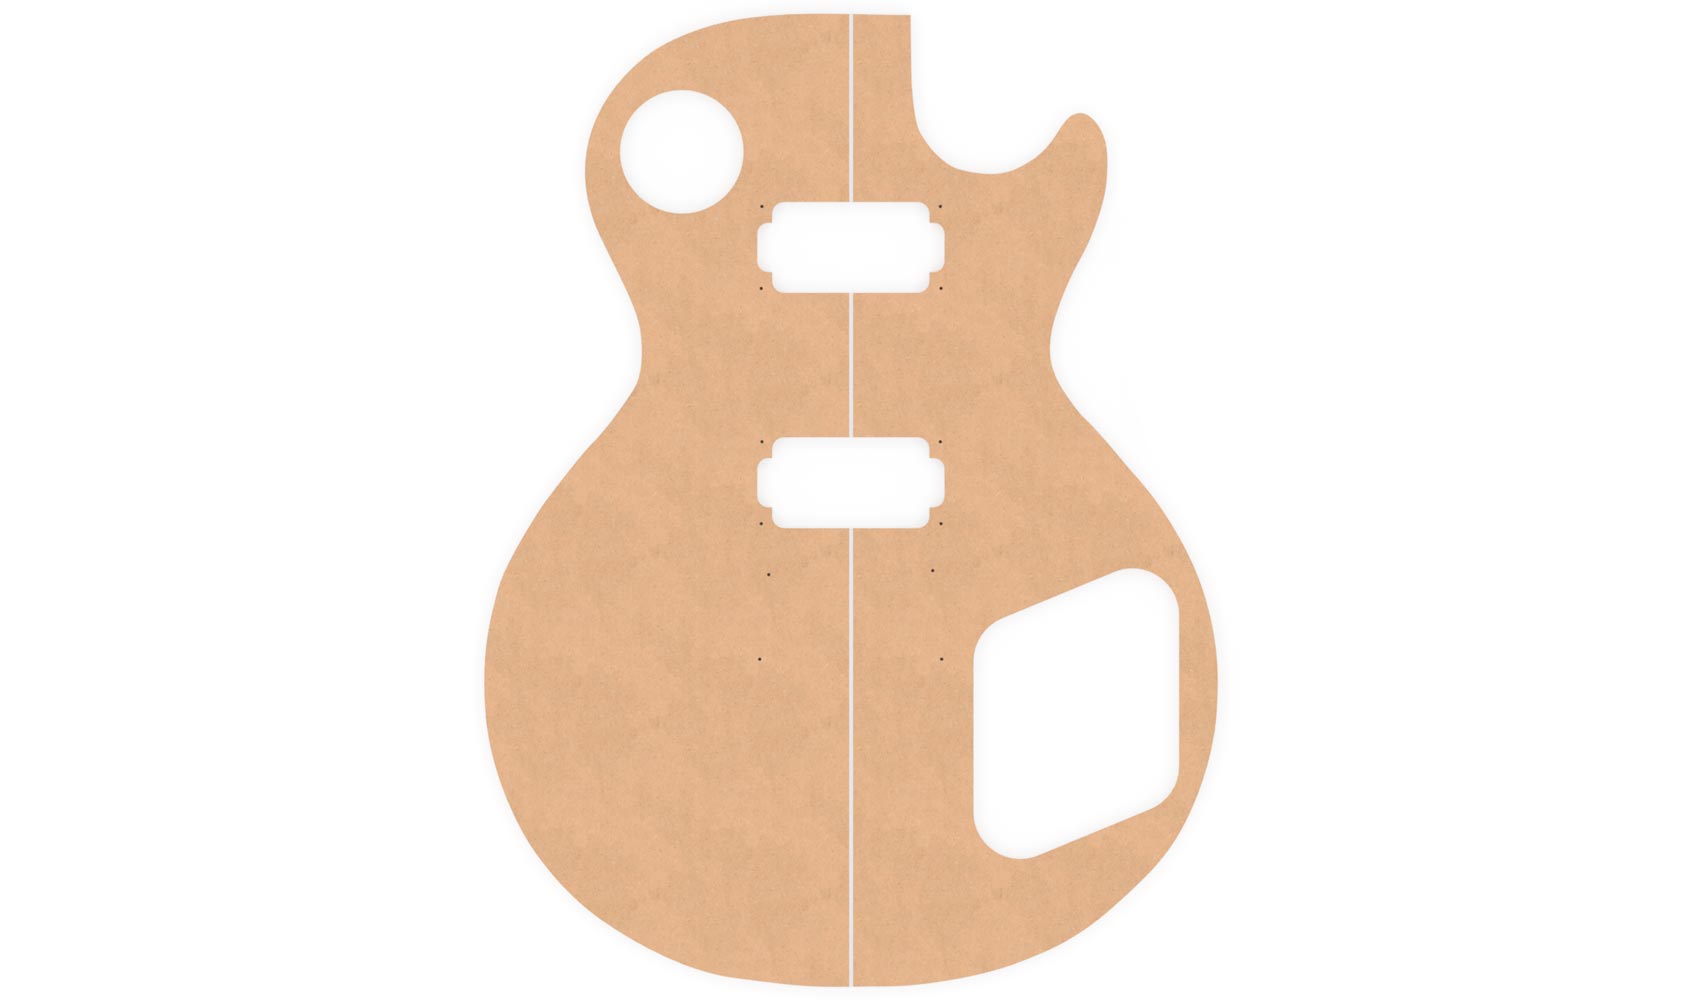 gibson-les-paul-custom-router-templates-electric-herald